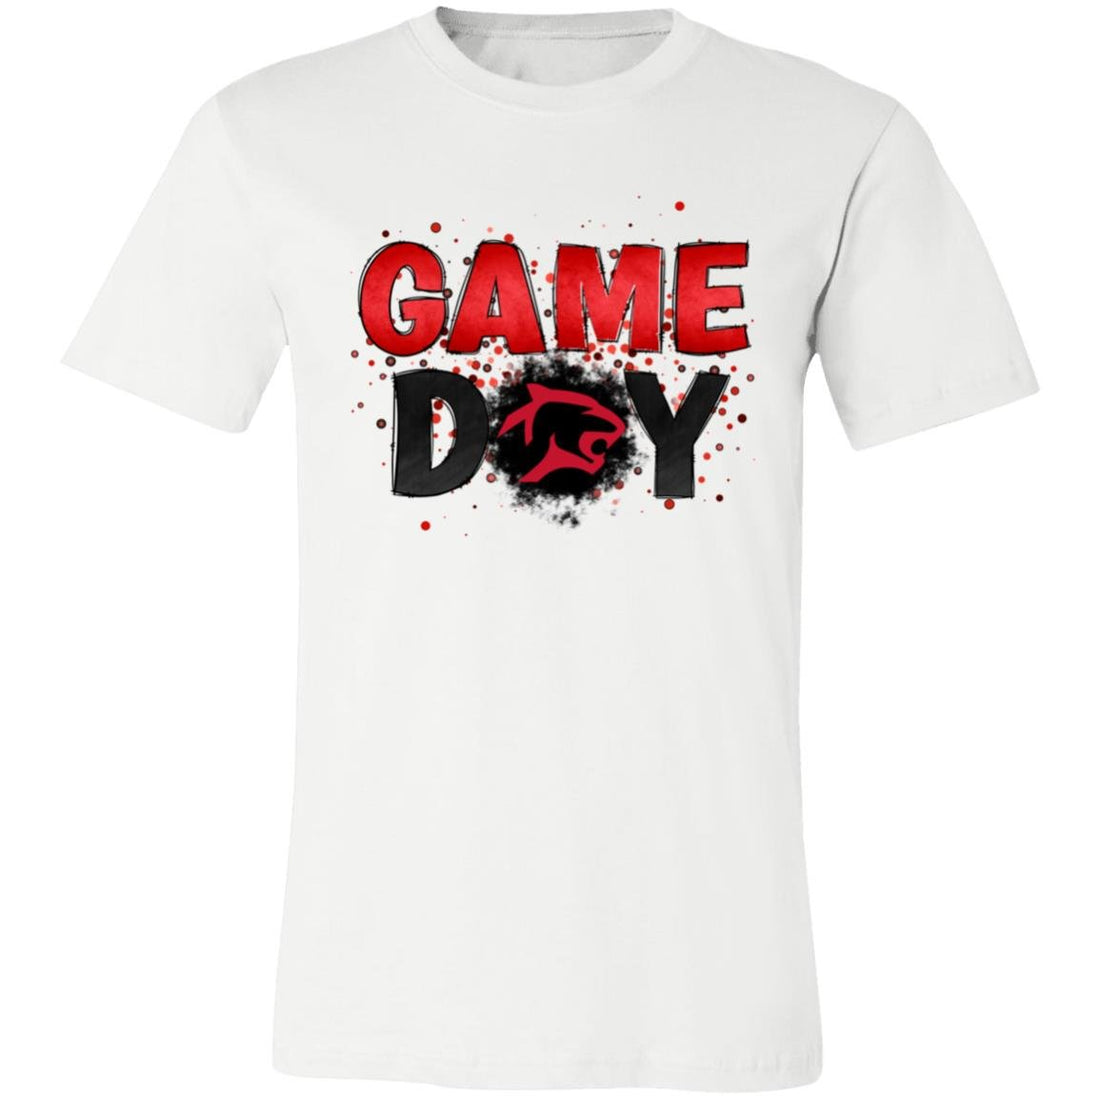 Panthers Game Day Short-Sleeve T-Shirt - T-Shirts - Positively Sassy - Panthers Game Day Short-Sleeve T-Shirt